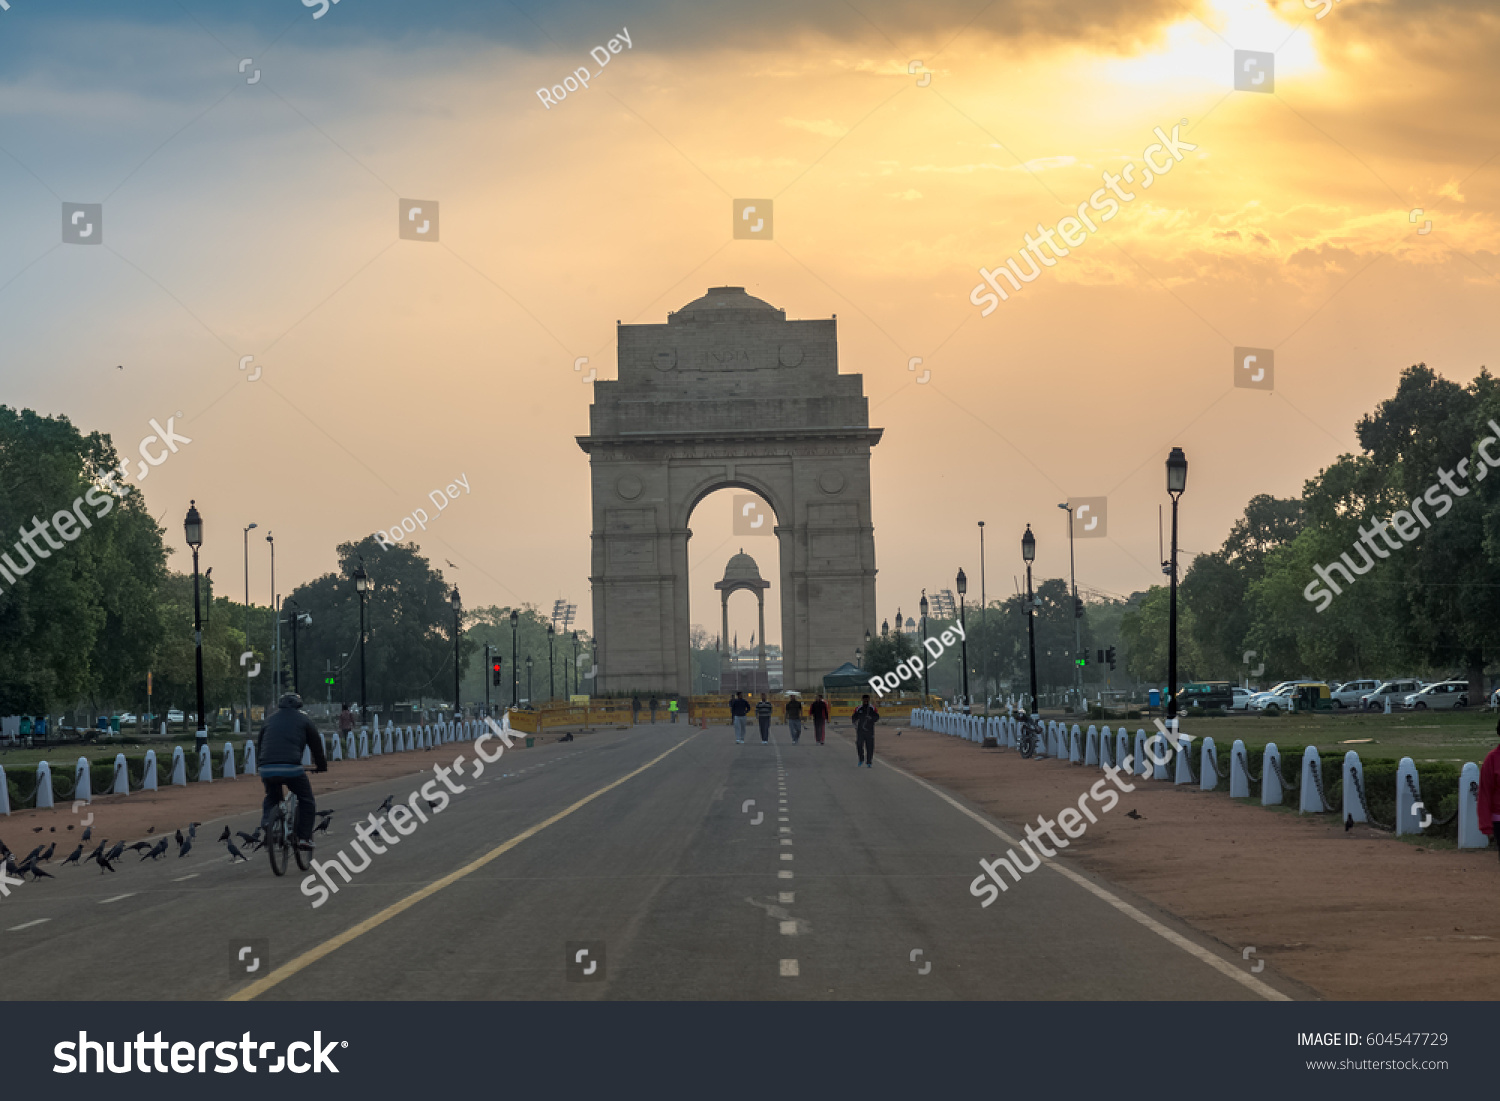 DELHI, INDIA, MARCH 10, 2017: View of Rajpath road New Delhi near India Gate at sunrise with morning walkers enjoying the fresh air. The India Gate, is a war memorial and a notable city landmark. #604547729